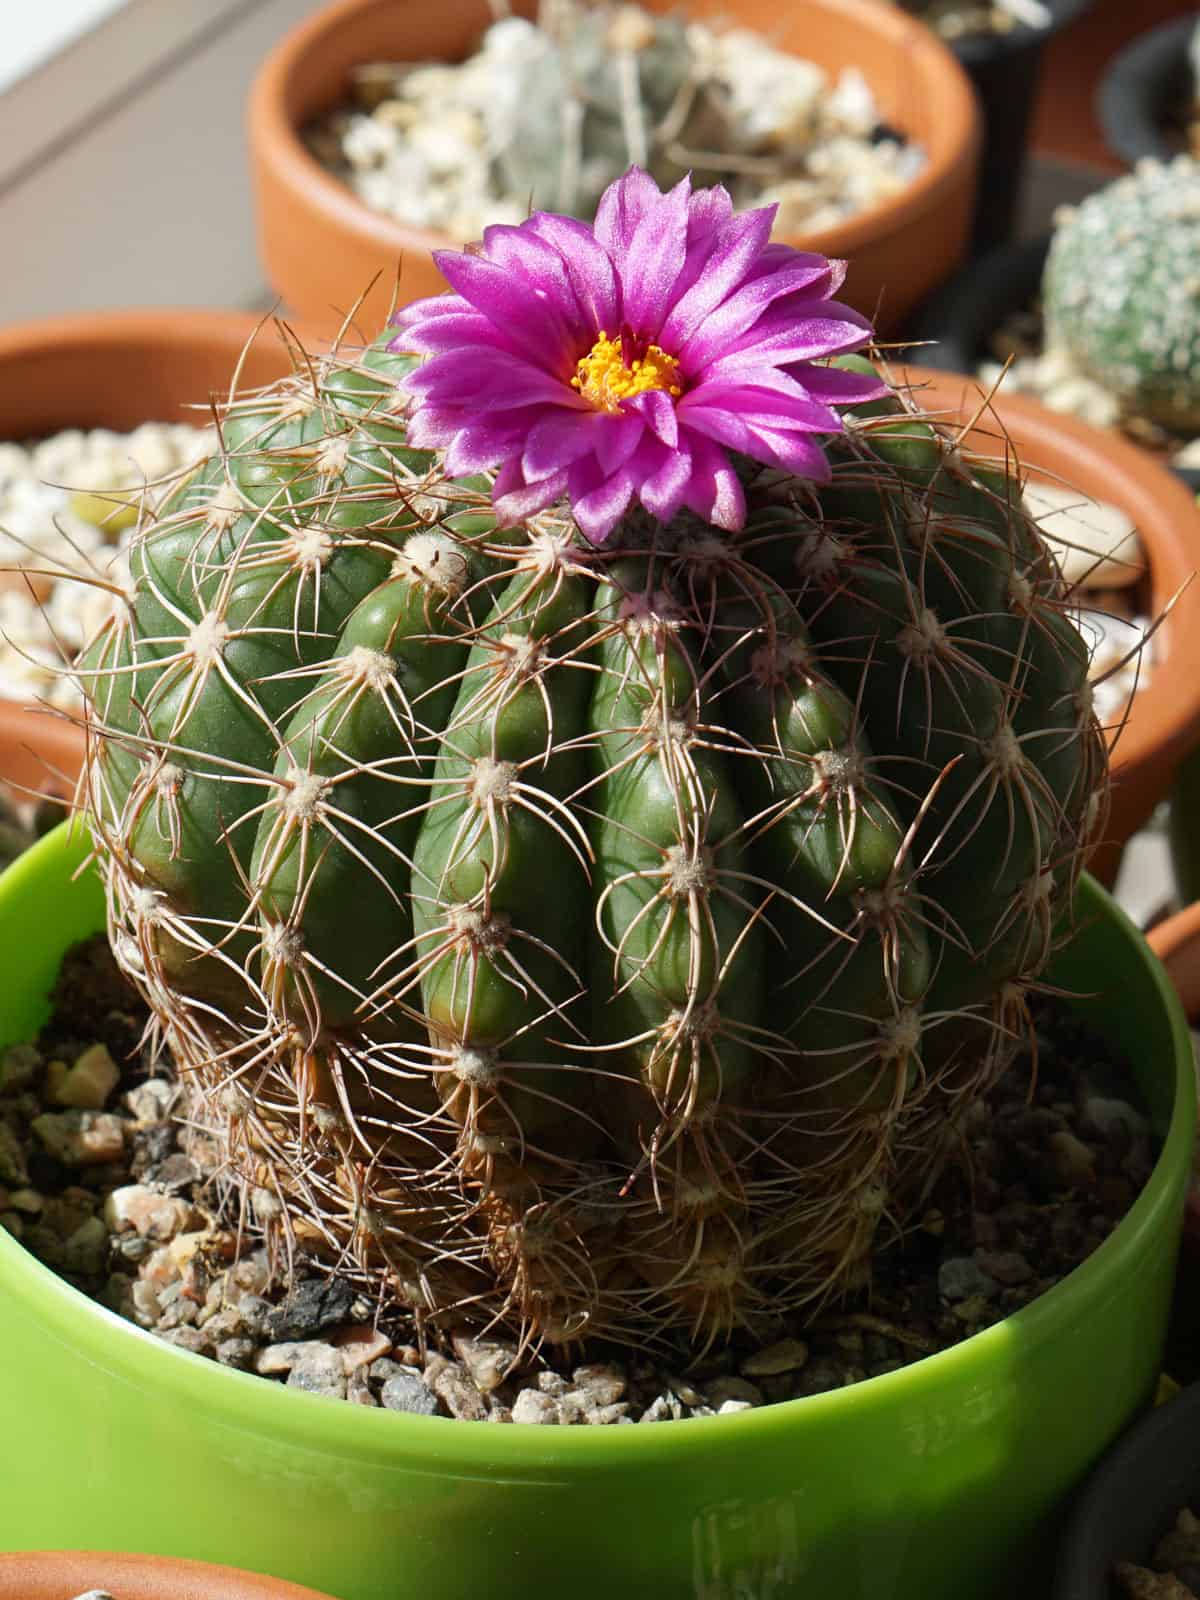 Paradia Werneri cactus with a bright purple blooming 